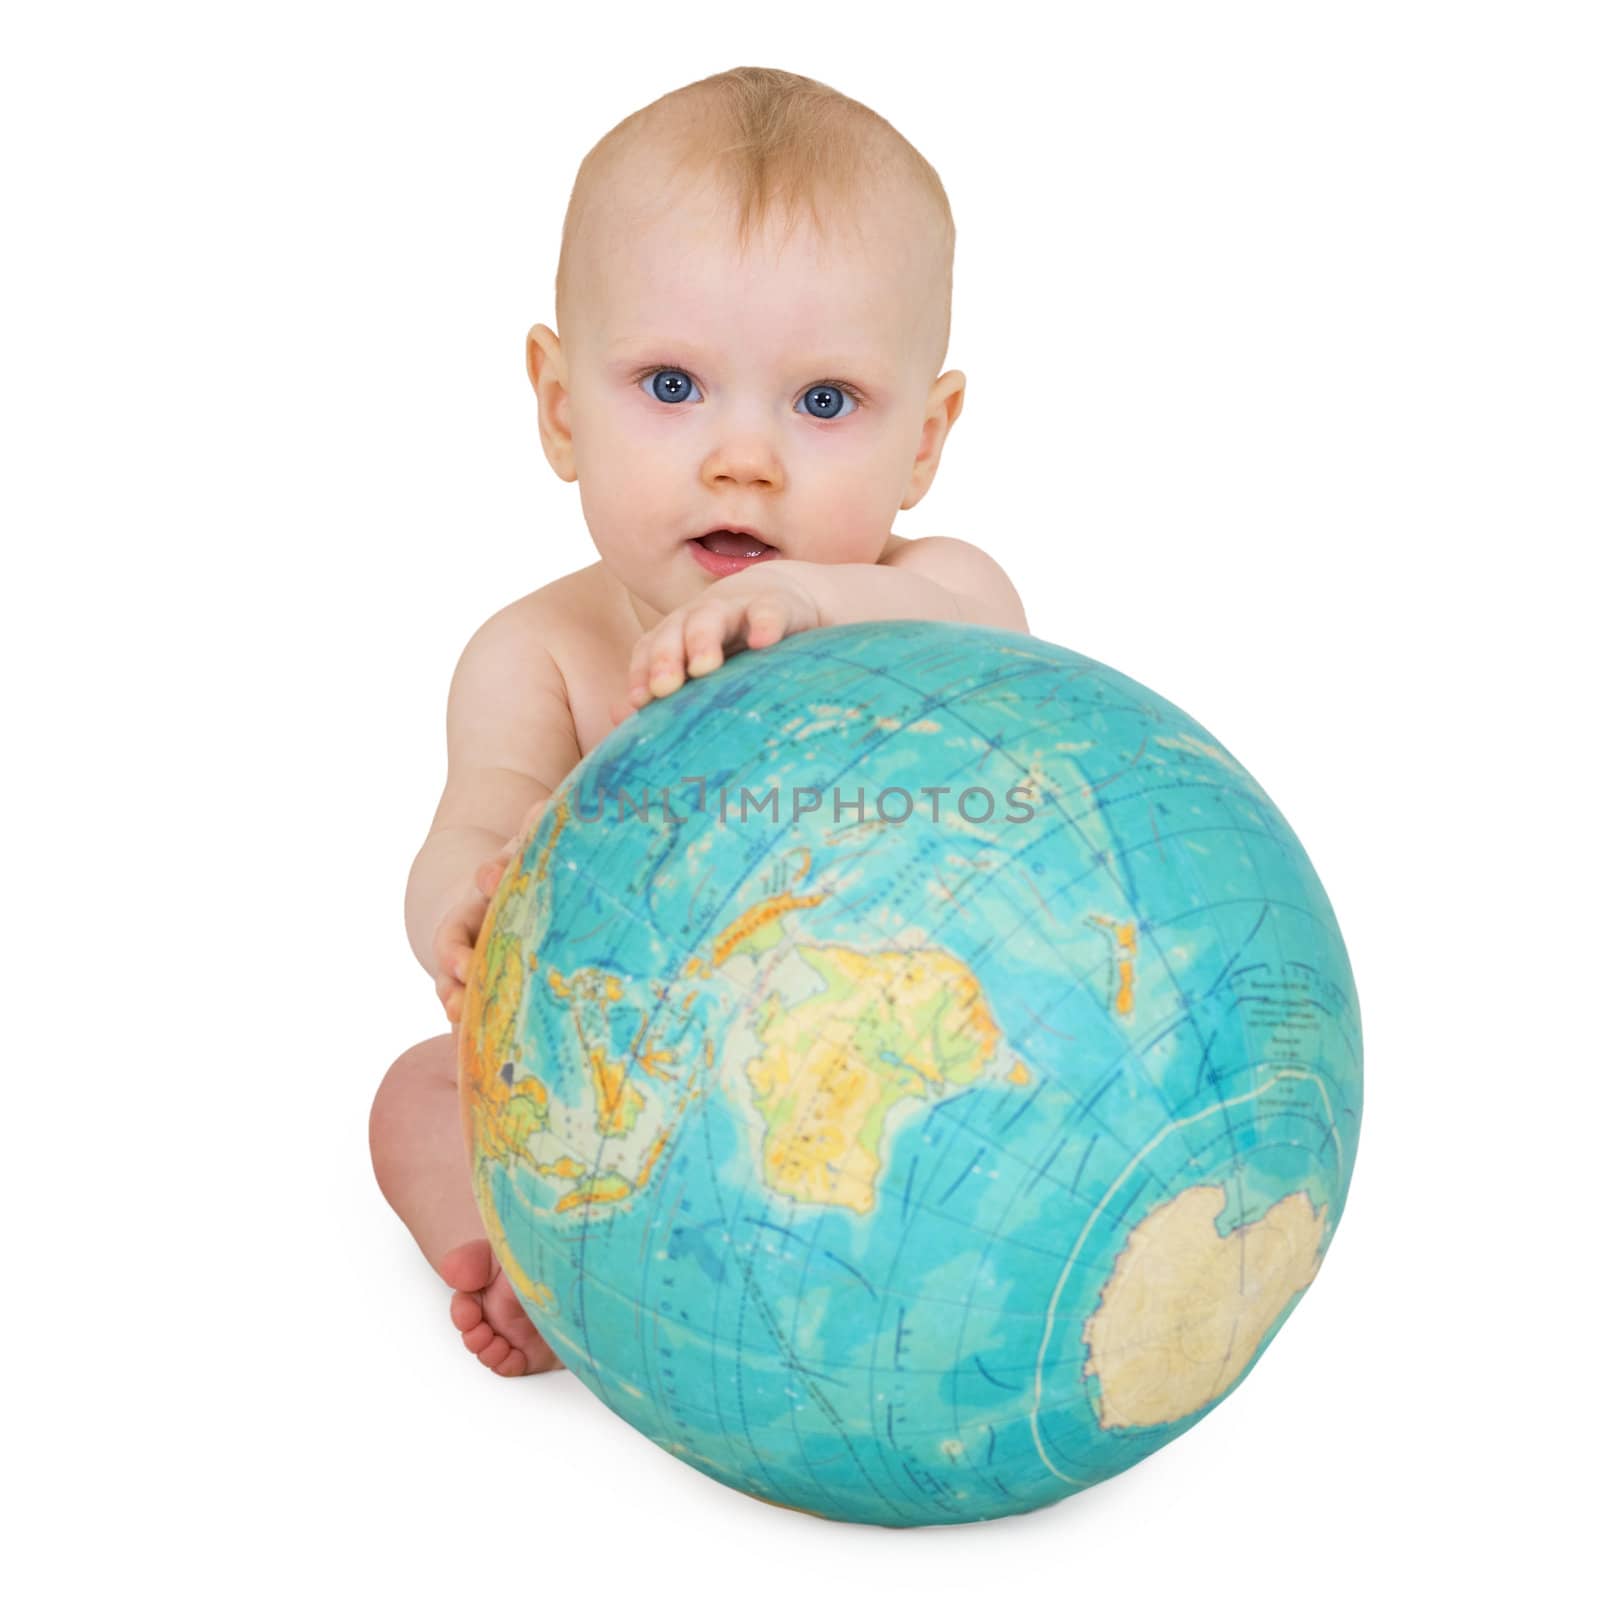 A baby sitting on a white background with a globe